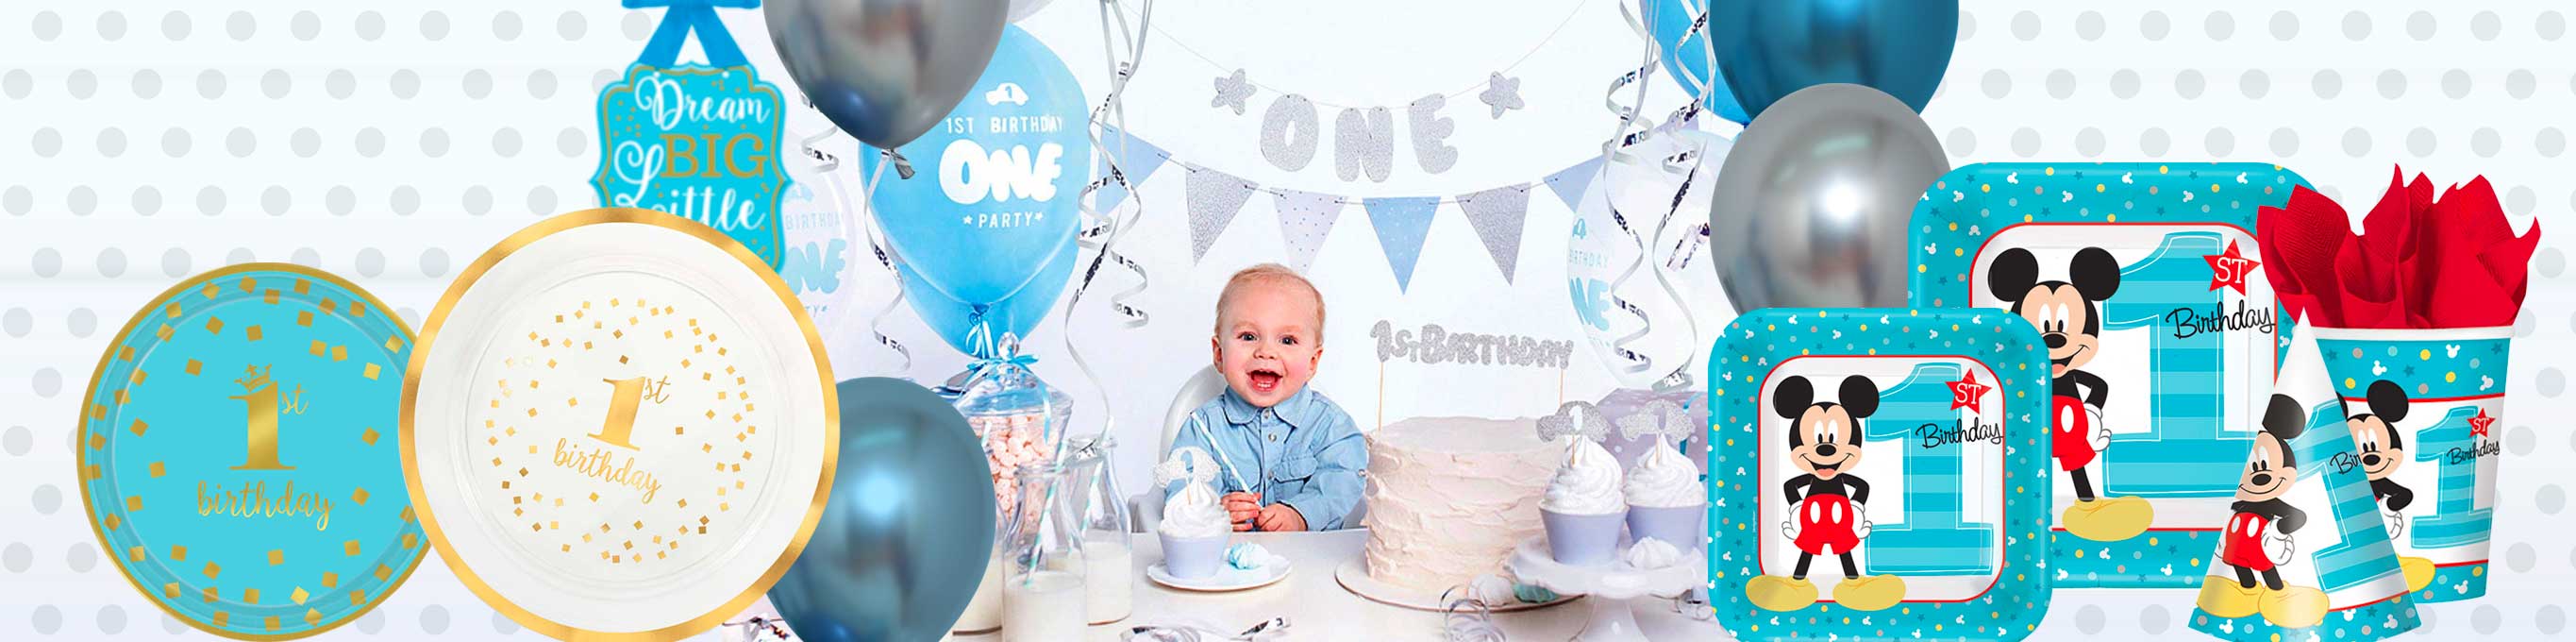 6 Most Favorite Boys’ 1st Birthday Party Themes: The Party Supplies You Will Need To Celebrate - MyPartyCentre